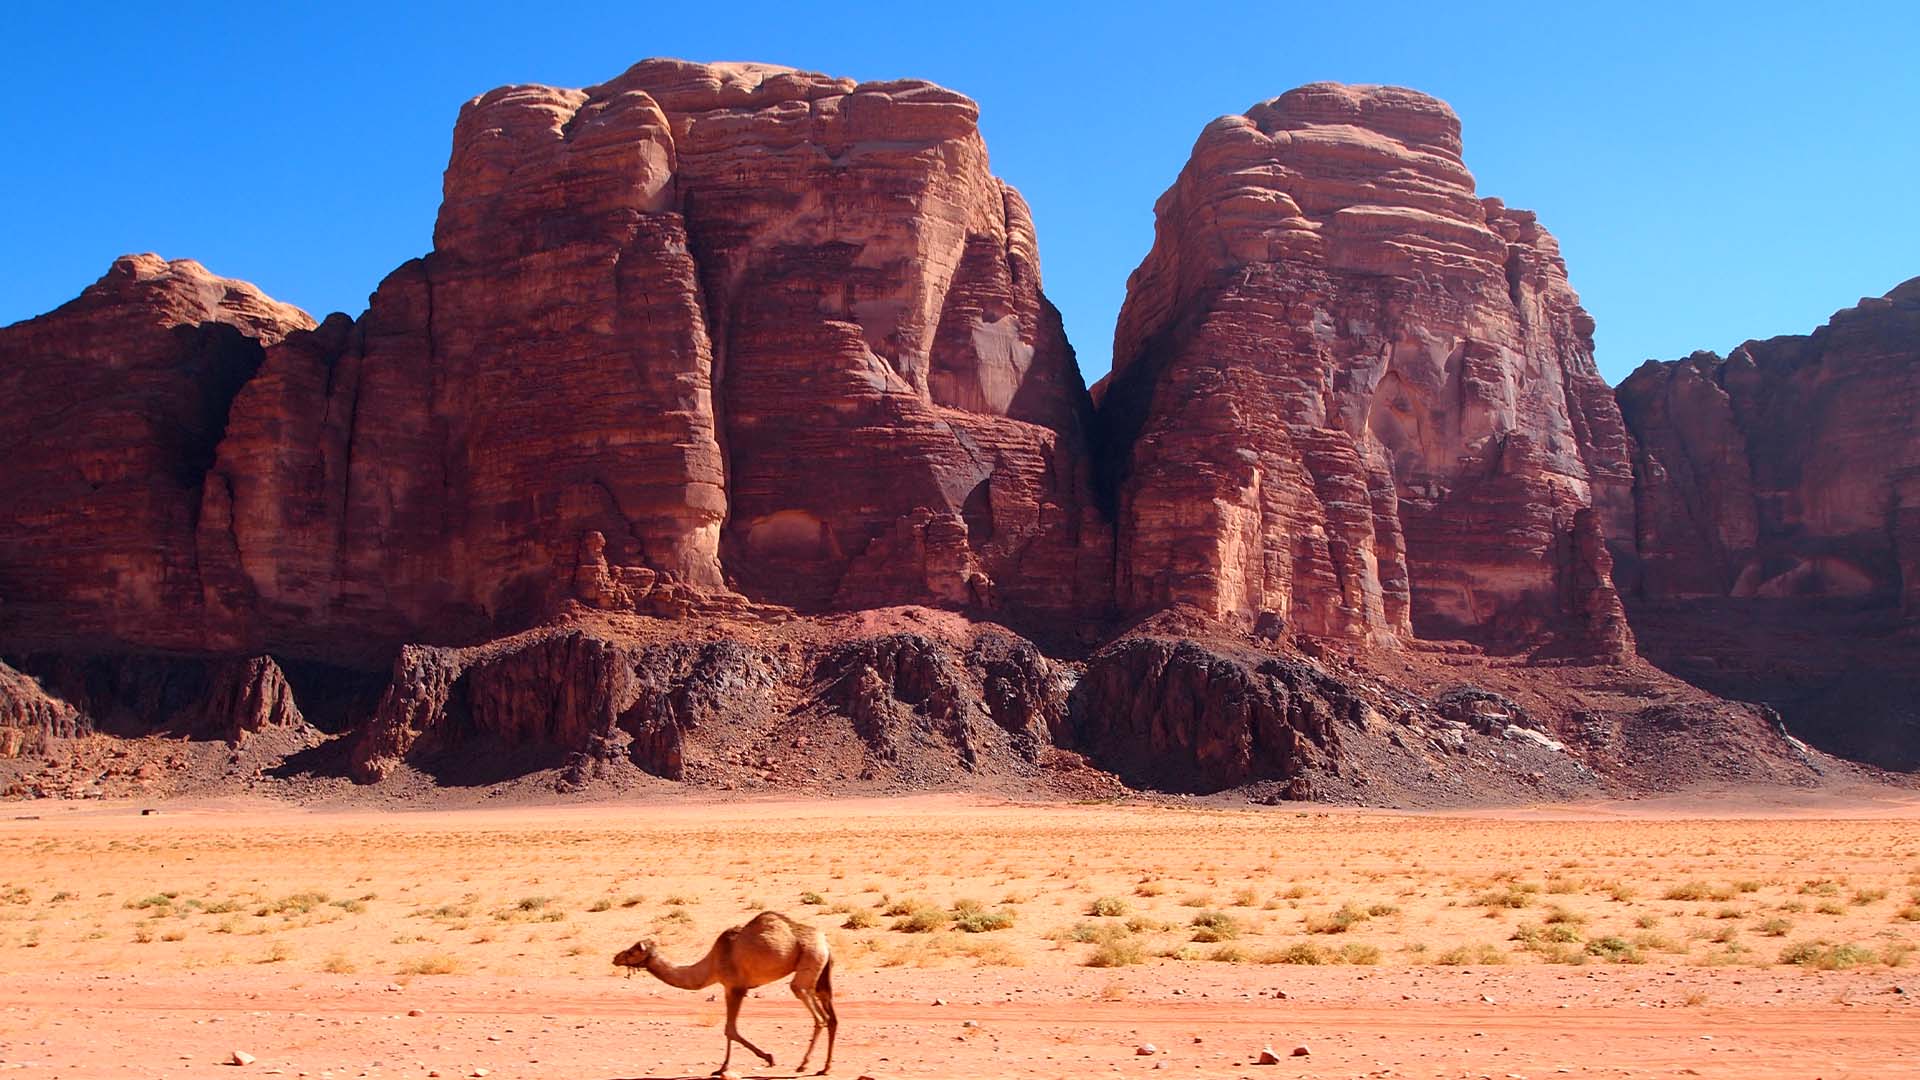 Travel to Jordan: A panoramic photograph immortalizes the awe-inspiring Wadi Rum, where a camel commands attention in the foreground, while towering cliffs serve as a dramatic backdrop.